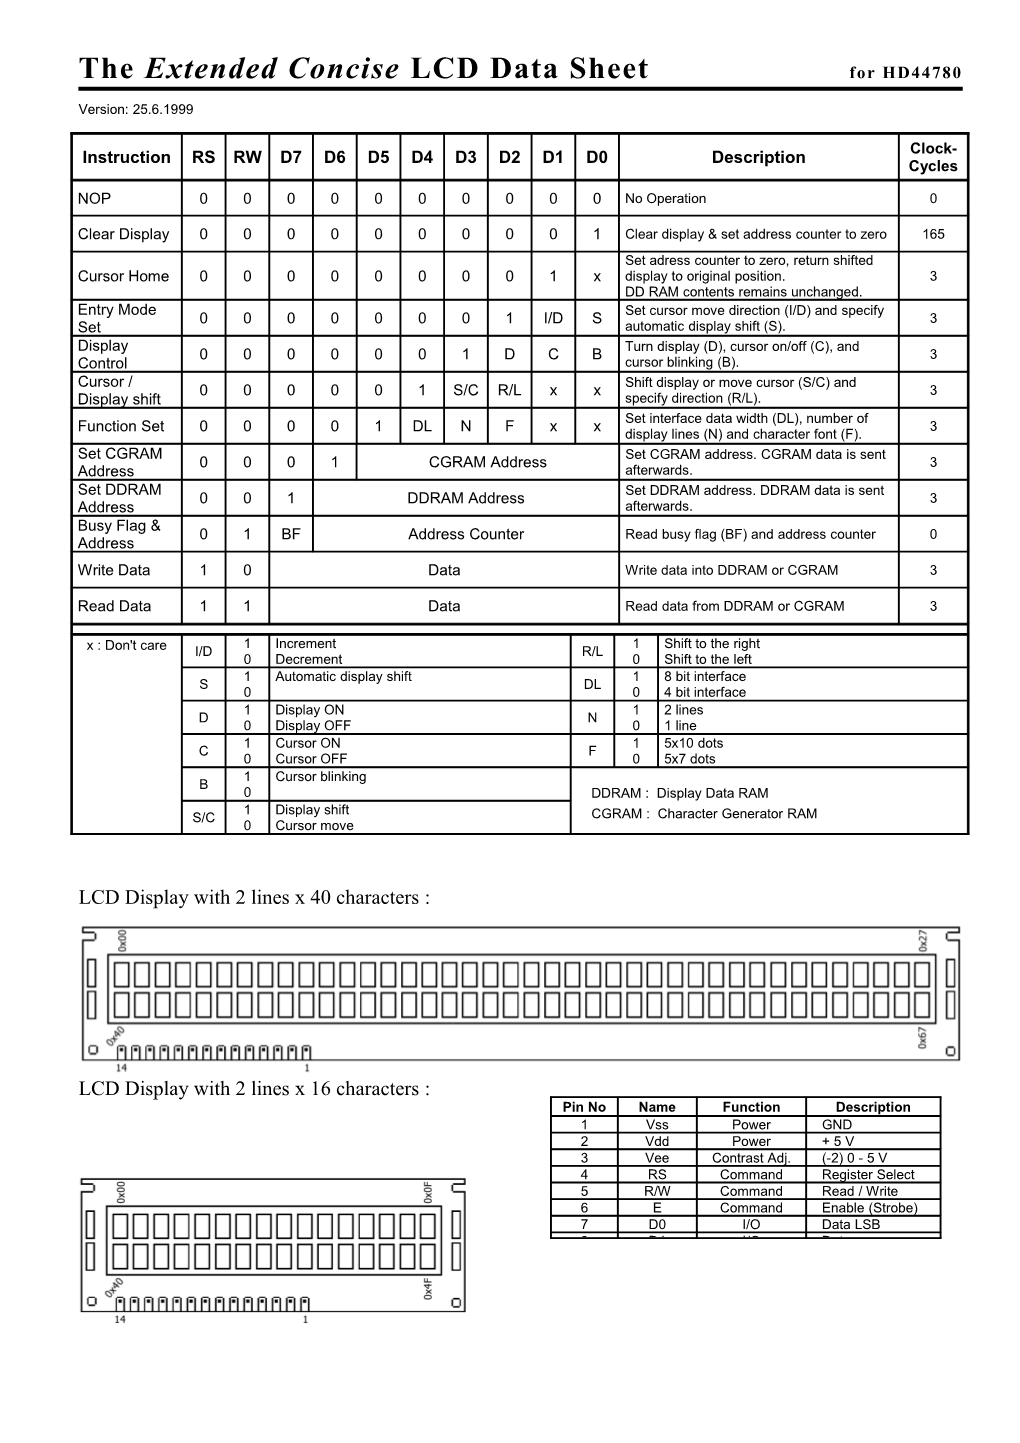 The Extended Concise LCD Data Sheet